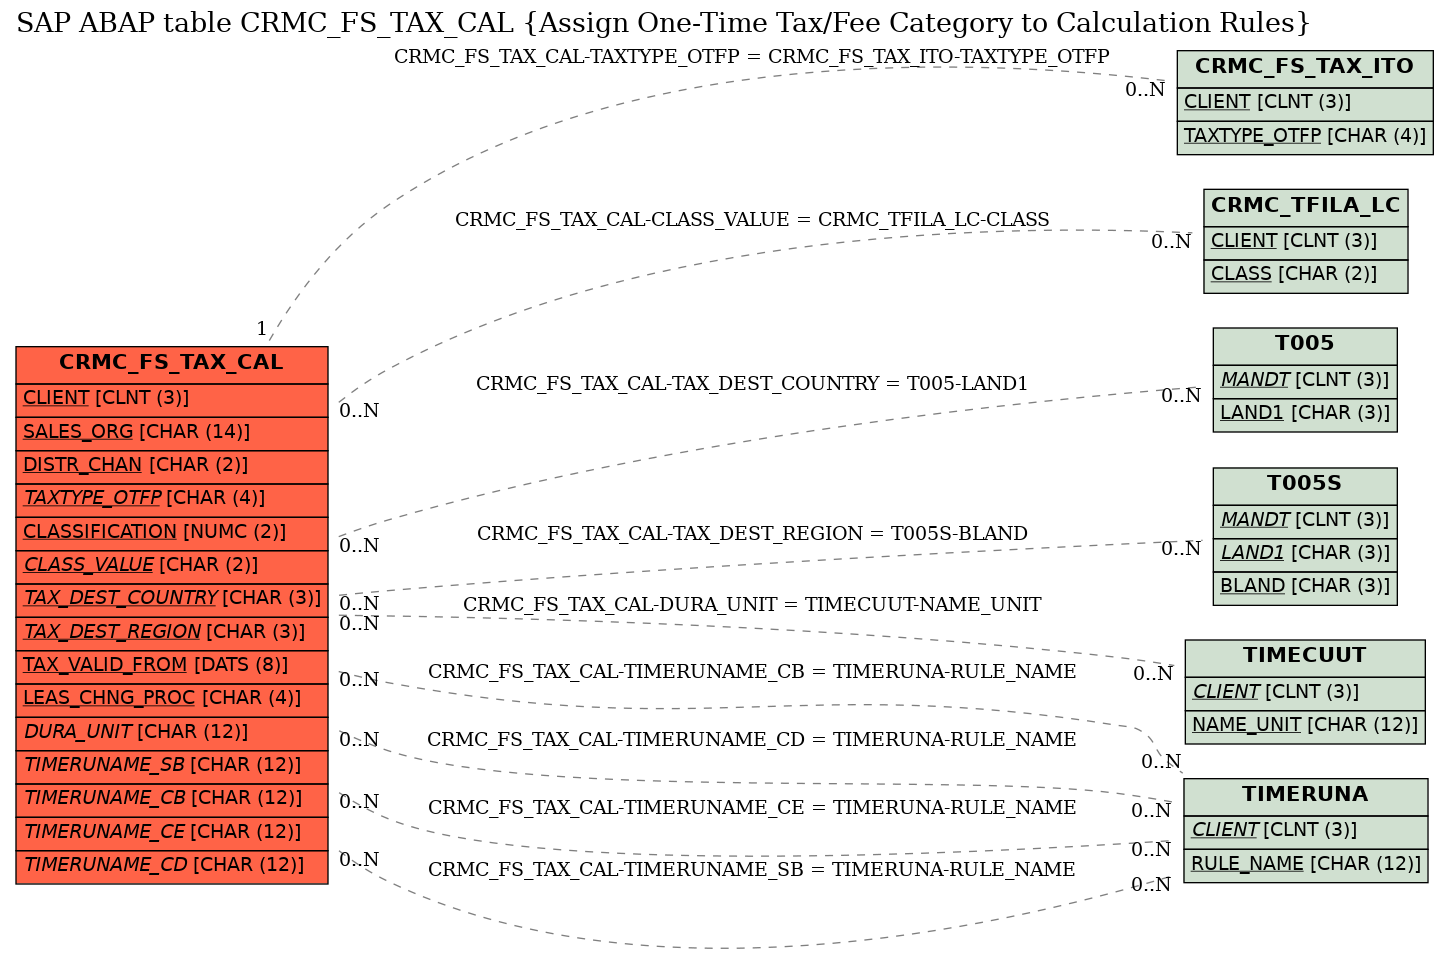 E-R Diagram for table CRMC_FS_TAX_CAL (Assign One-Time Tax/Fee Category to Calculation Rules)